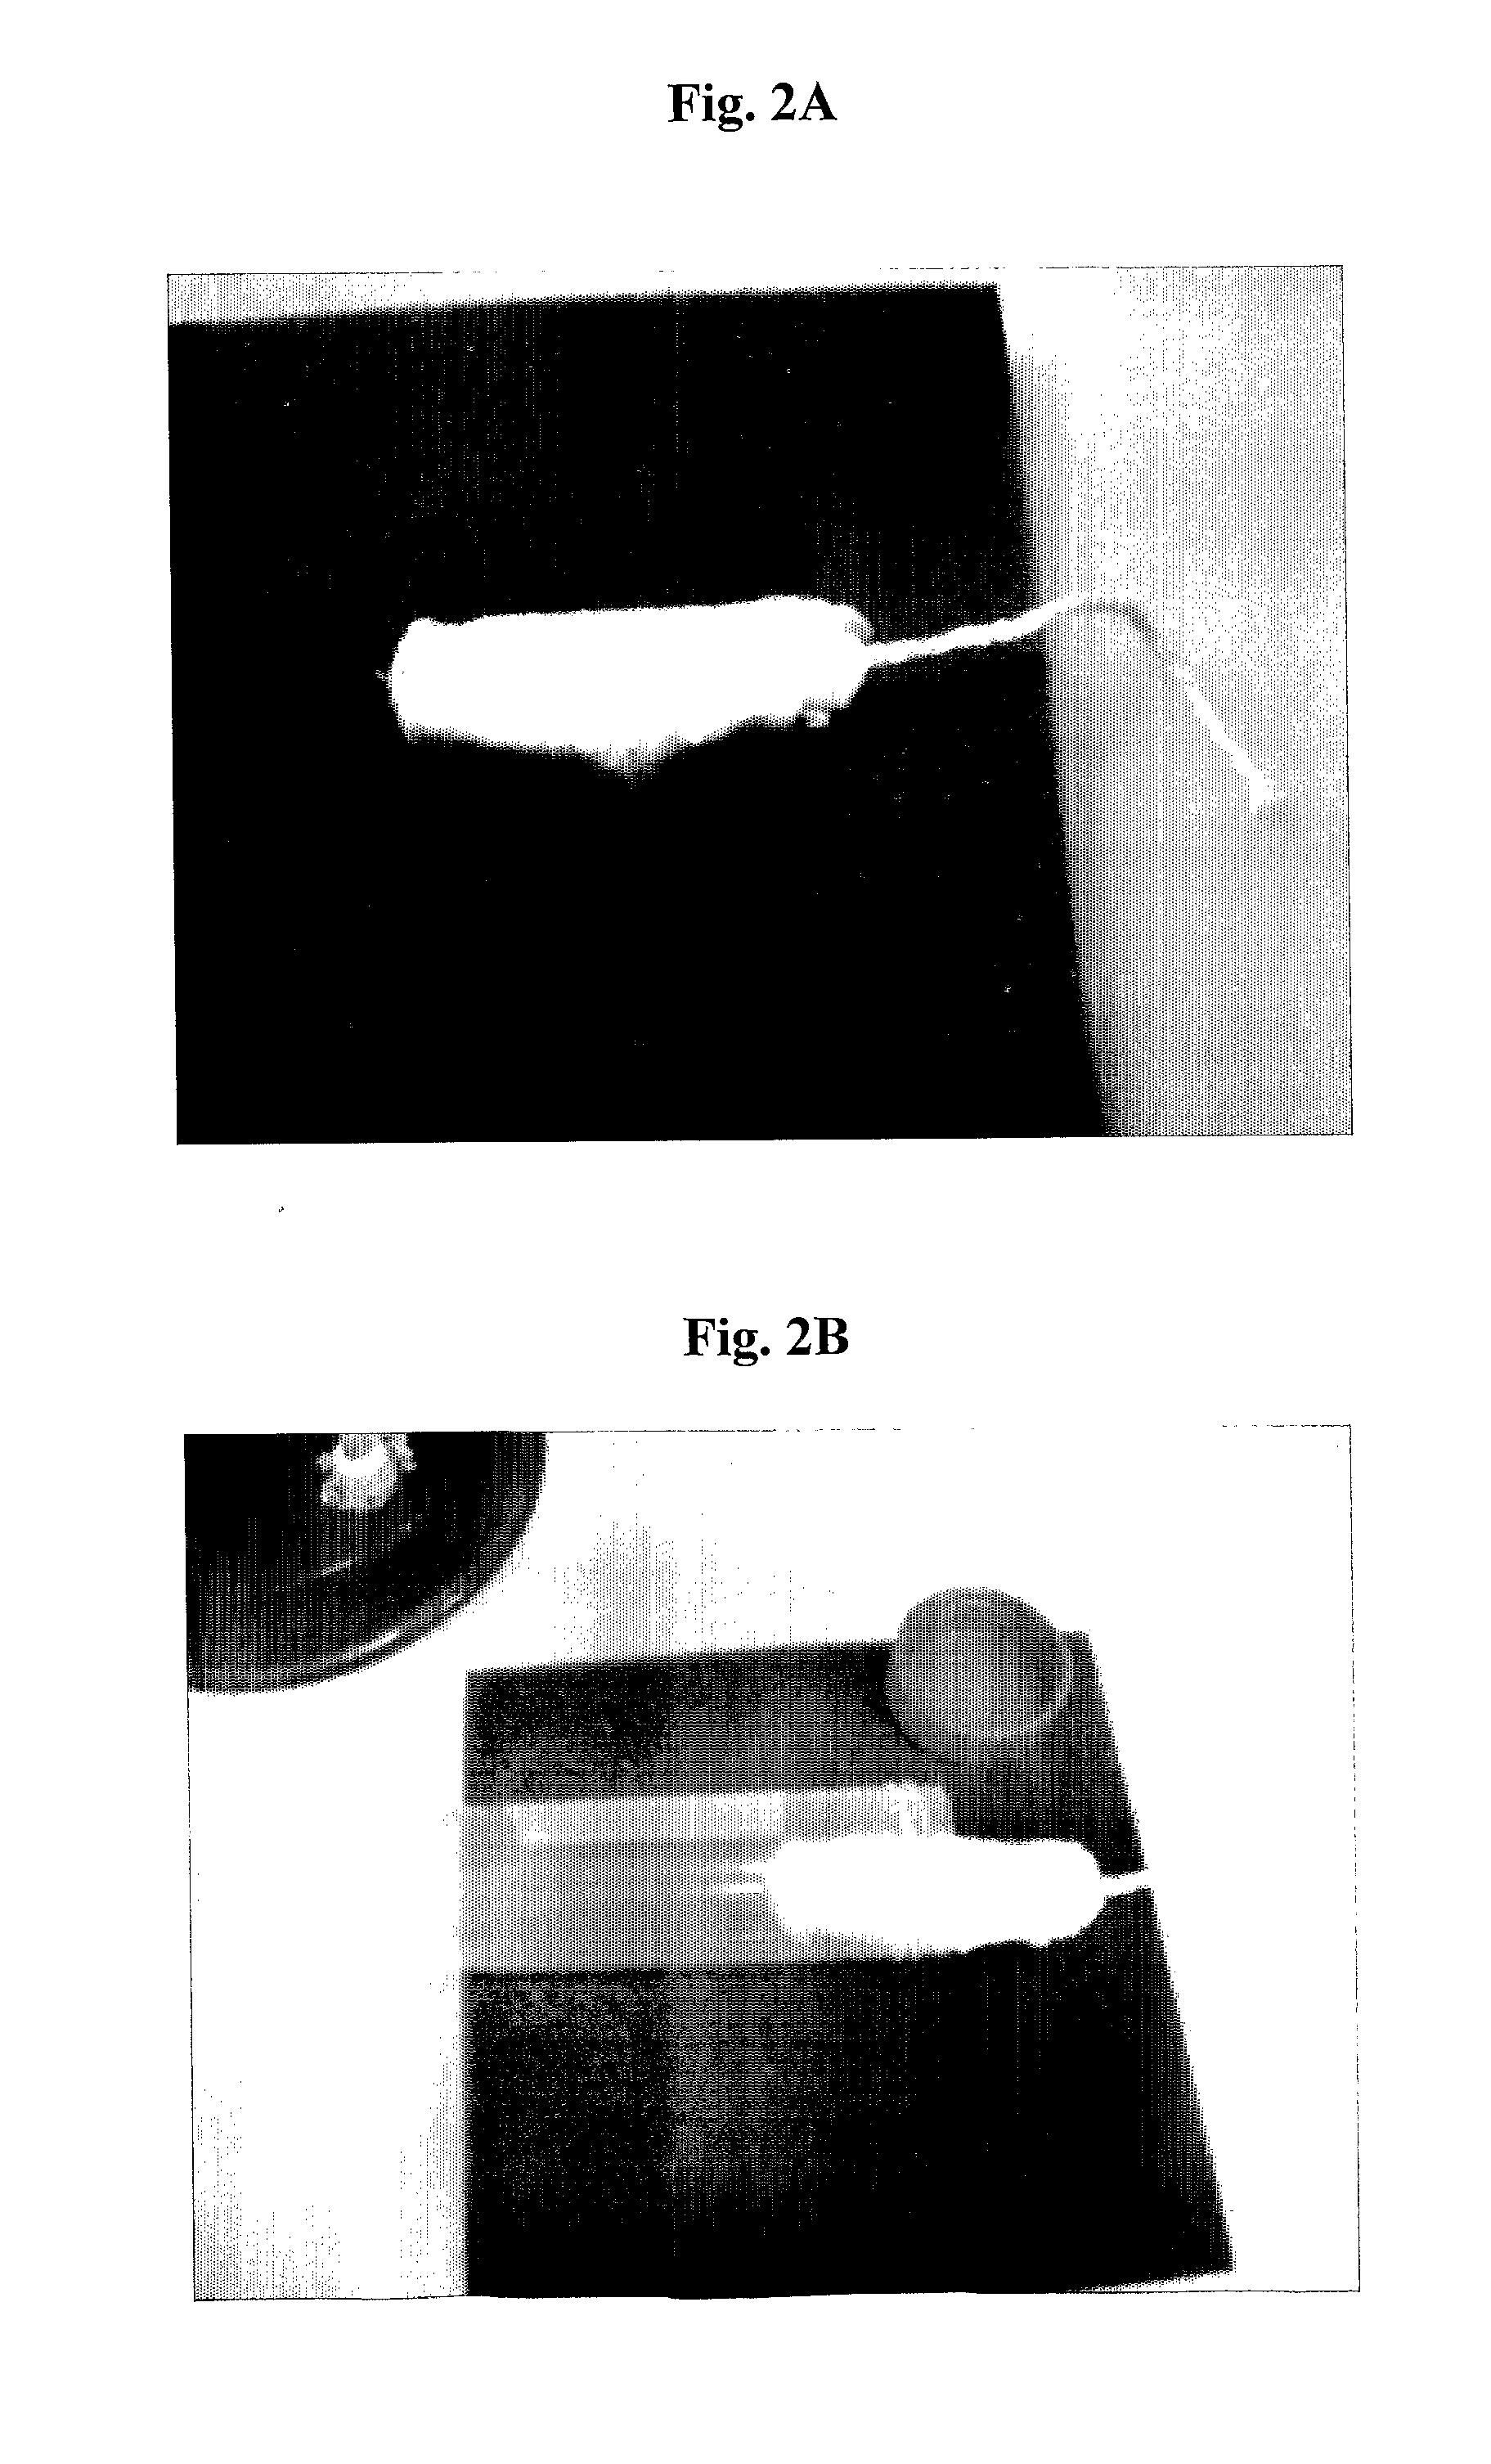 Device for in situ production and topical administration of allicin